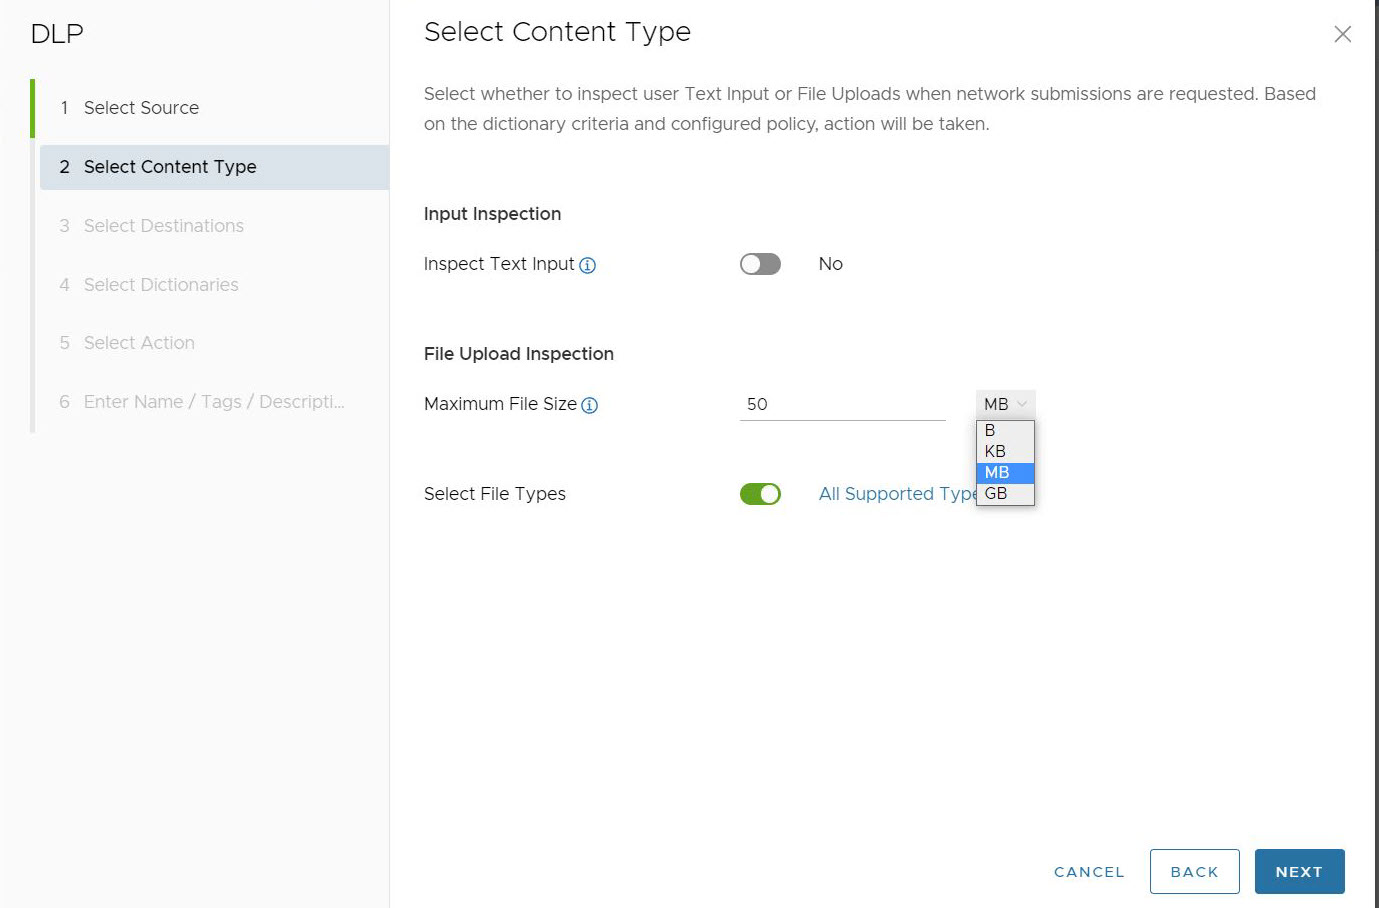 Default Screen for Select Content Type, showing Inspect Text Input, File Upload Inspection with Maximum File Size and Select File Types.